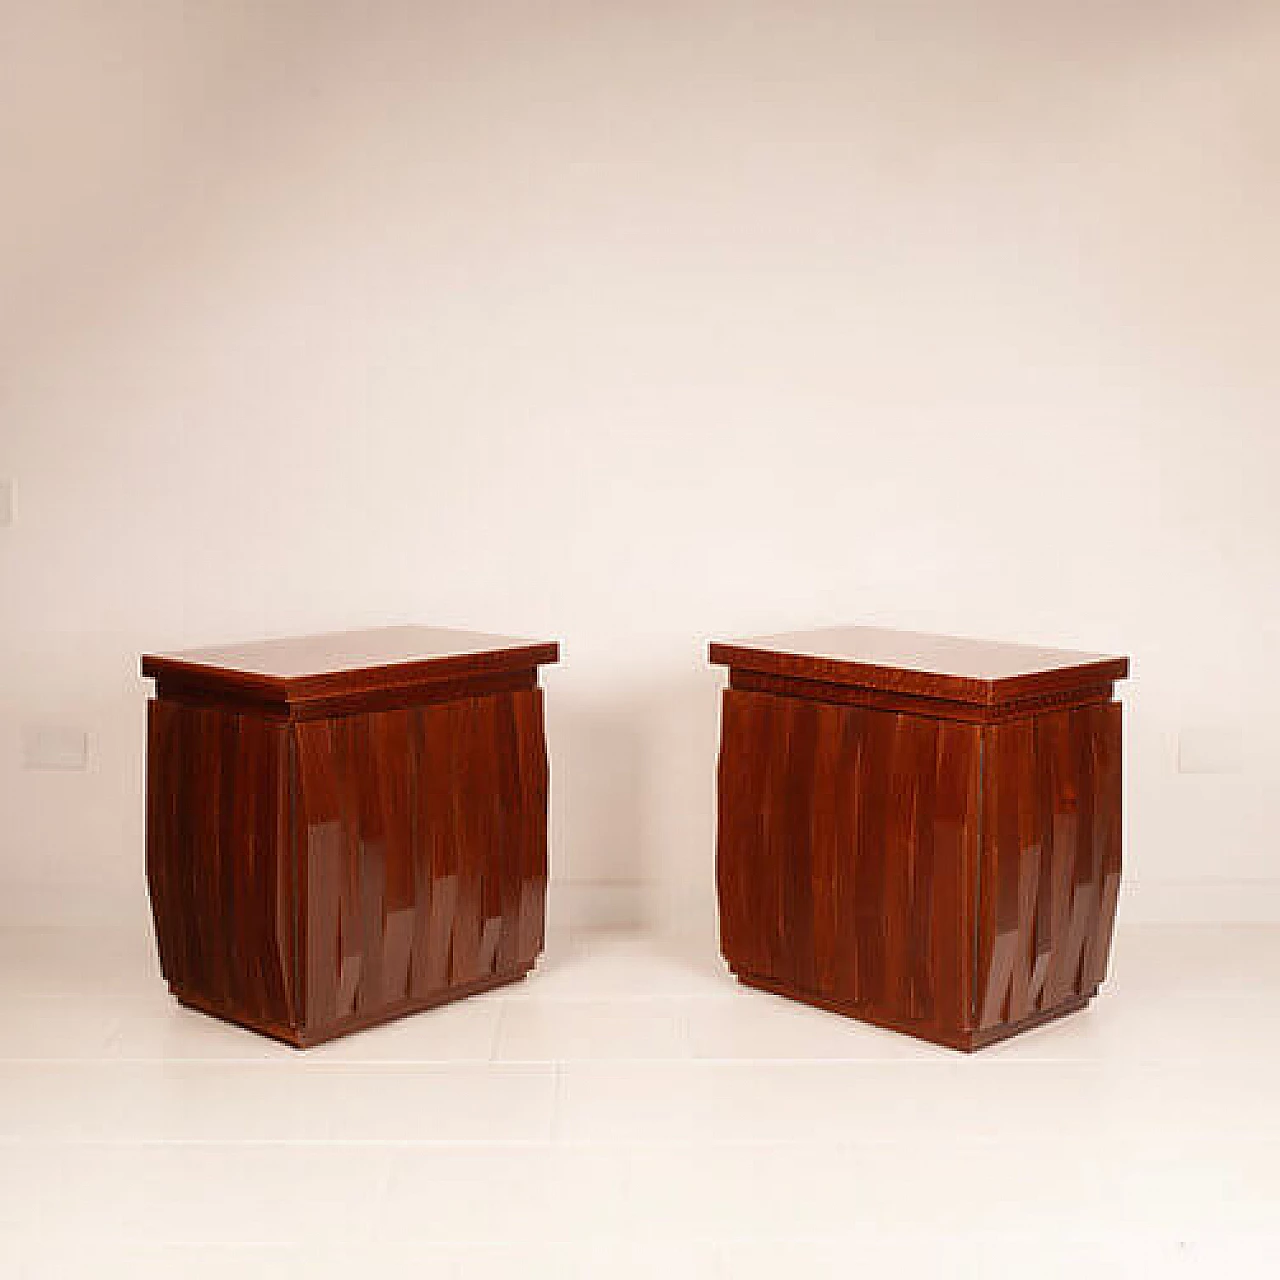 Pair of Barium solid walnut bedside tables by Luciano Frigerio for Frigerio di Desio, 1970s 2